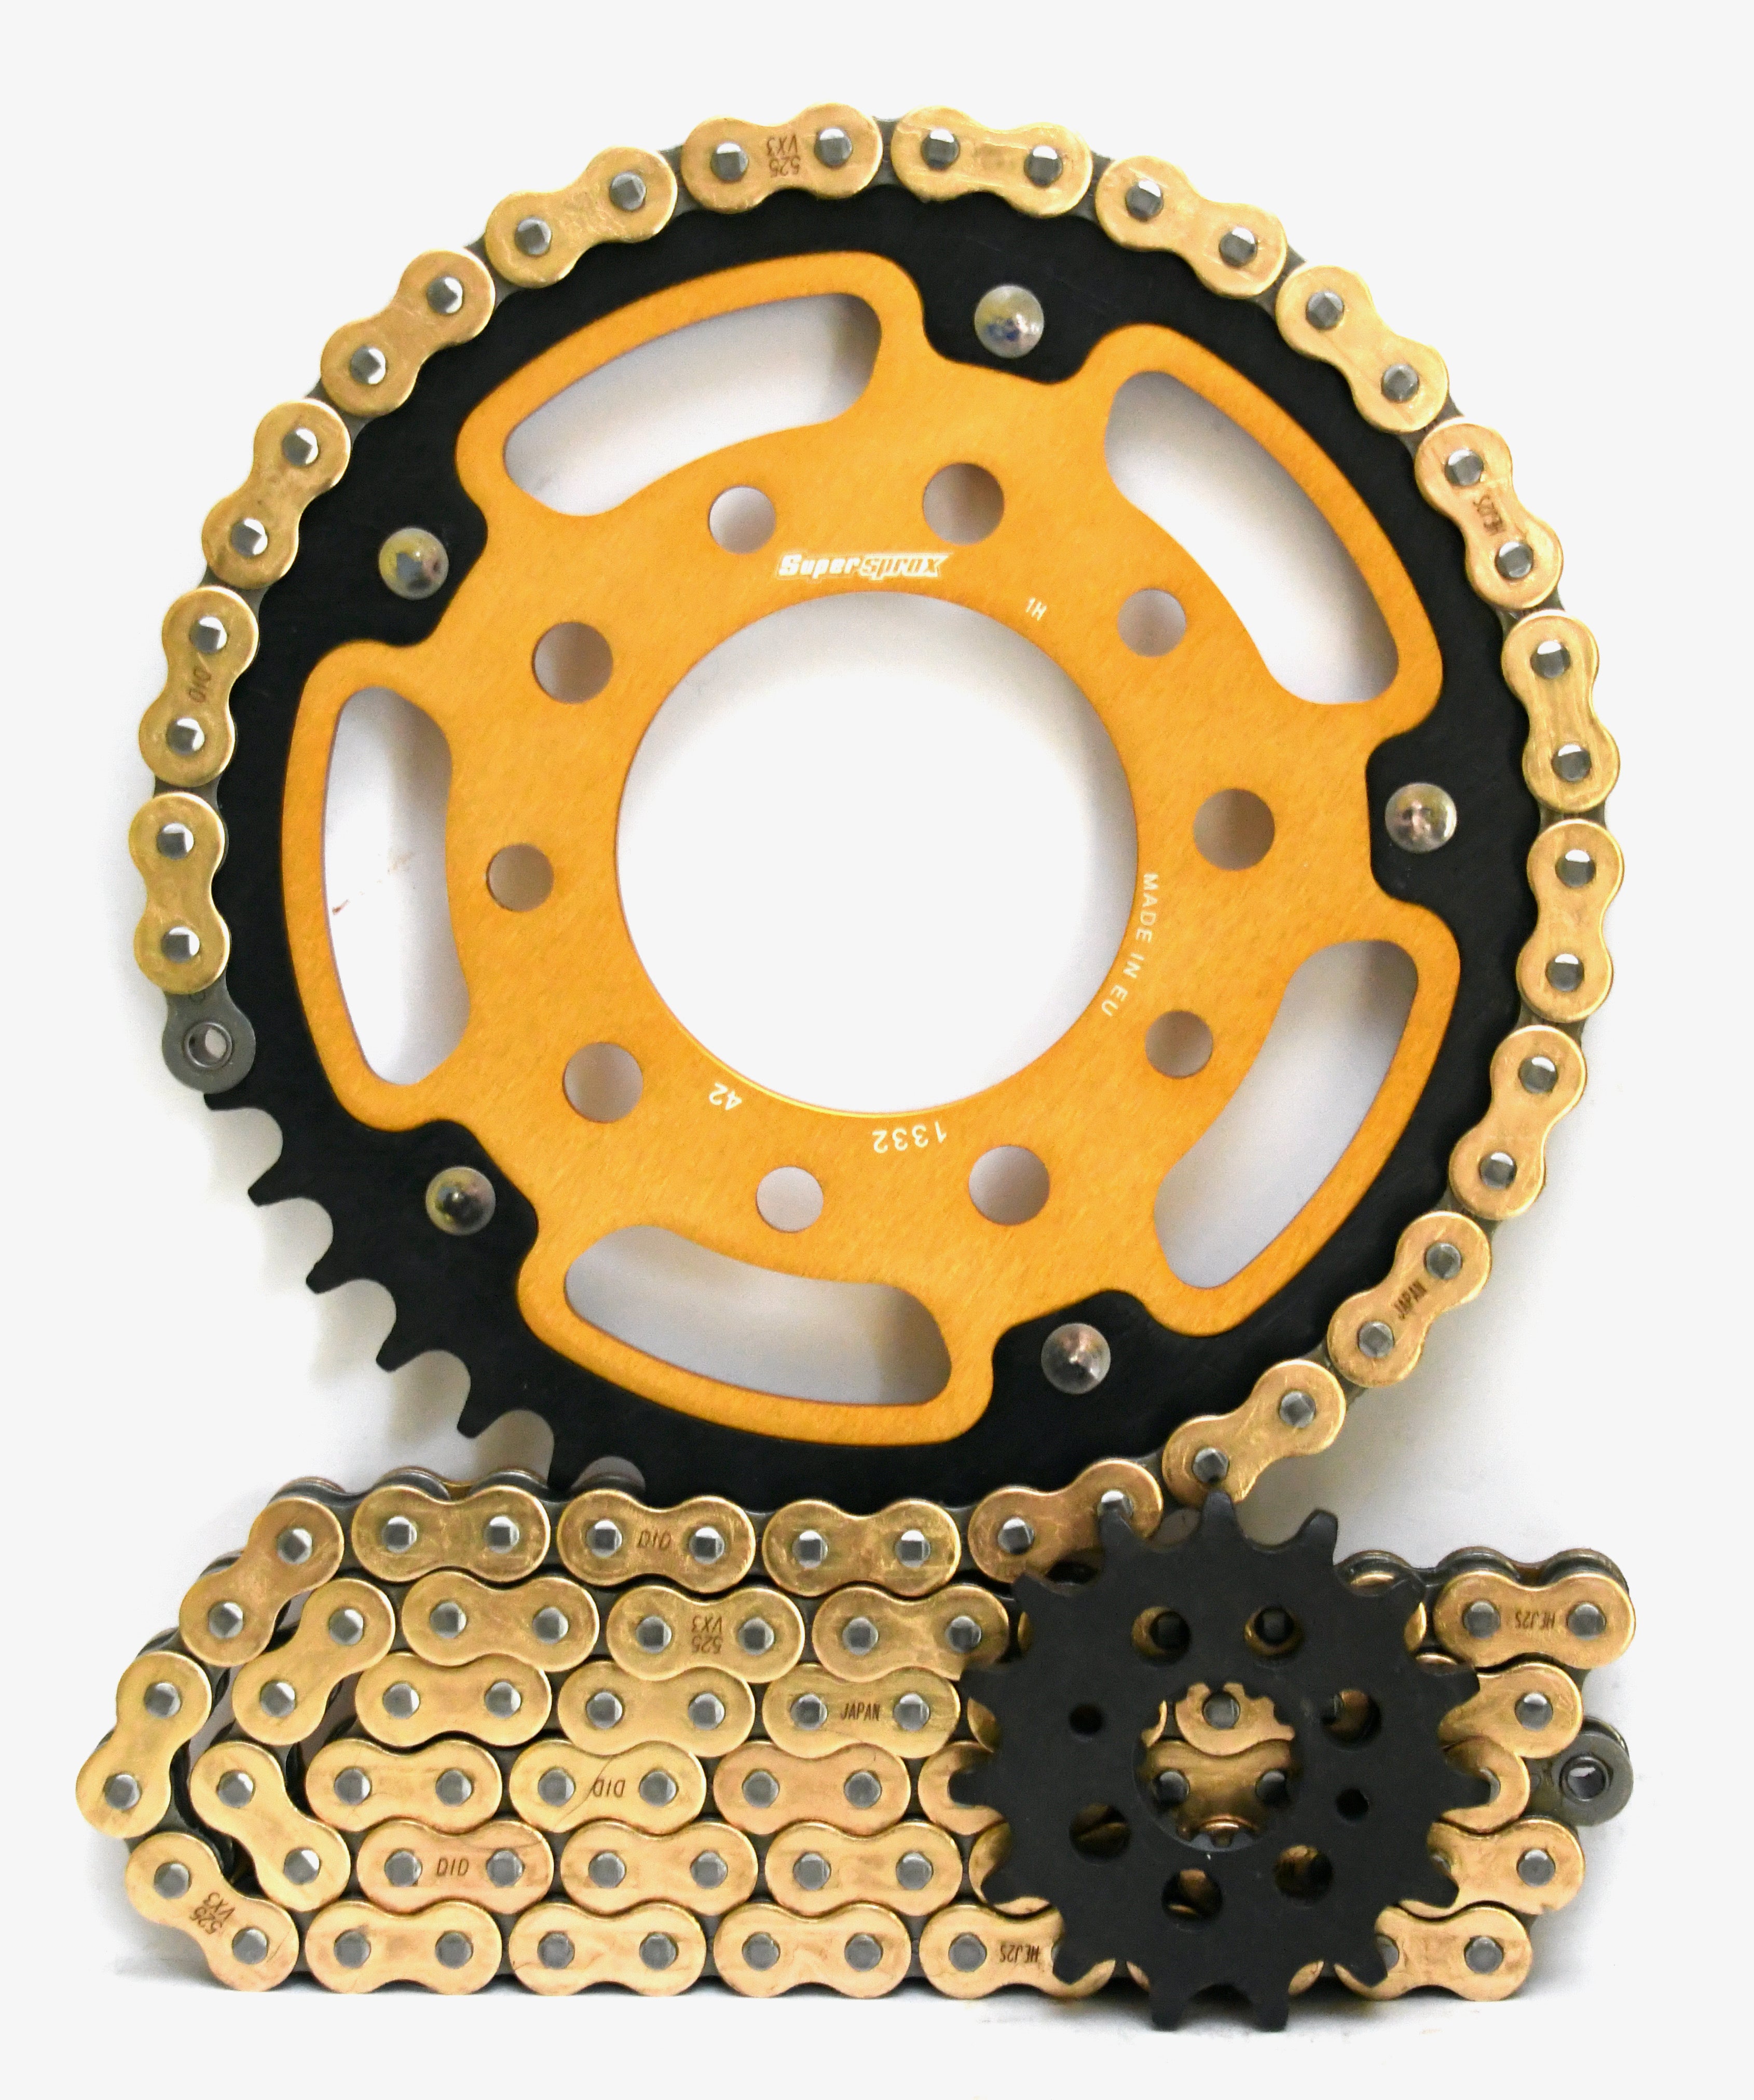 Supersprox Stealth Chain & Sprocket Kit for Triumph America 865 2007-2014 - Standard Gearing